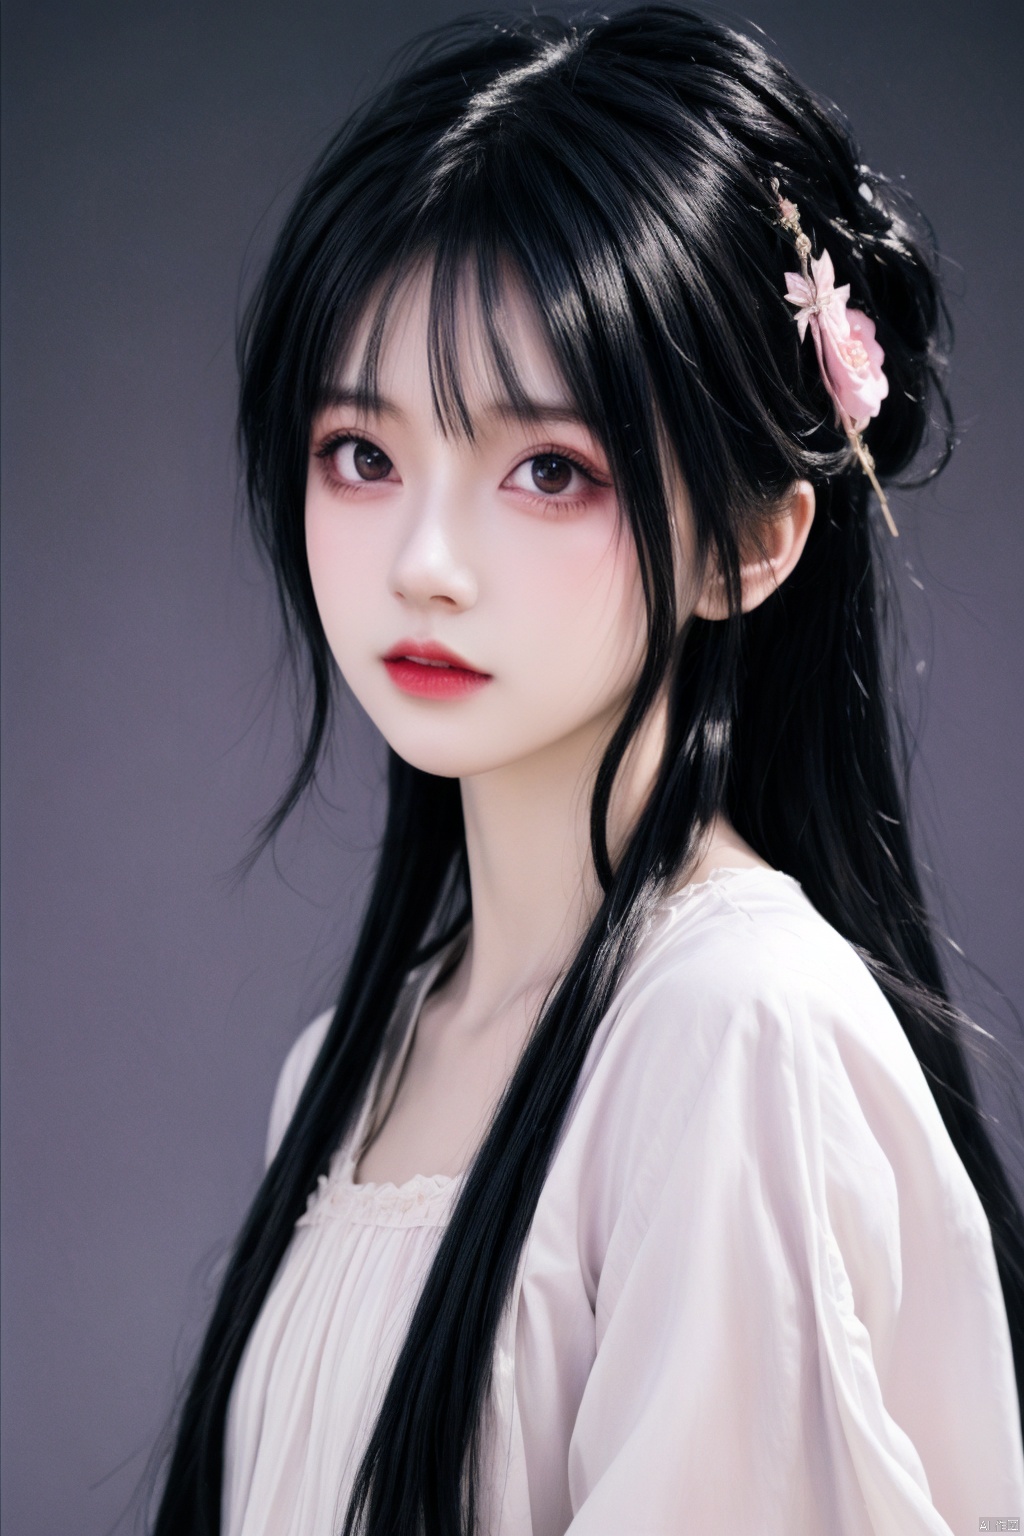  (((masterpiece))) anime style, cartoon, comic, anime comic, medium dark colors, soft tones, lighting details, generates an image of a 20-year-old a single gothic girl, black painted lips, pastel purple eyes, long black hair dark pastel purple background, the girls hair reaches her eyebrows, defined eyebrows